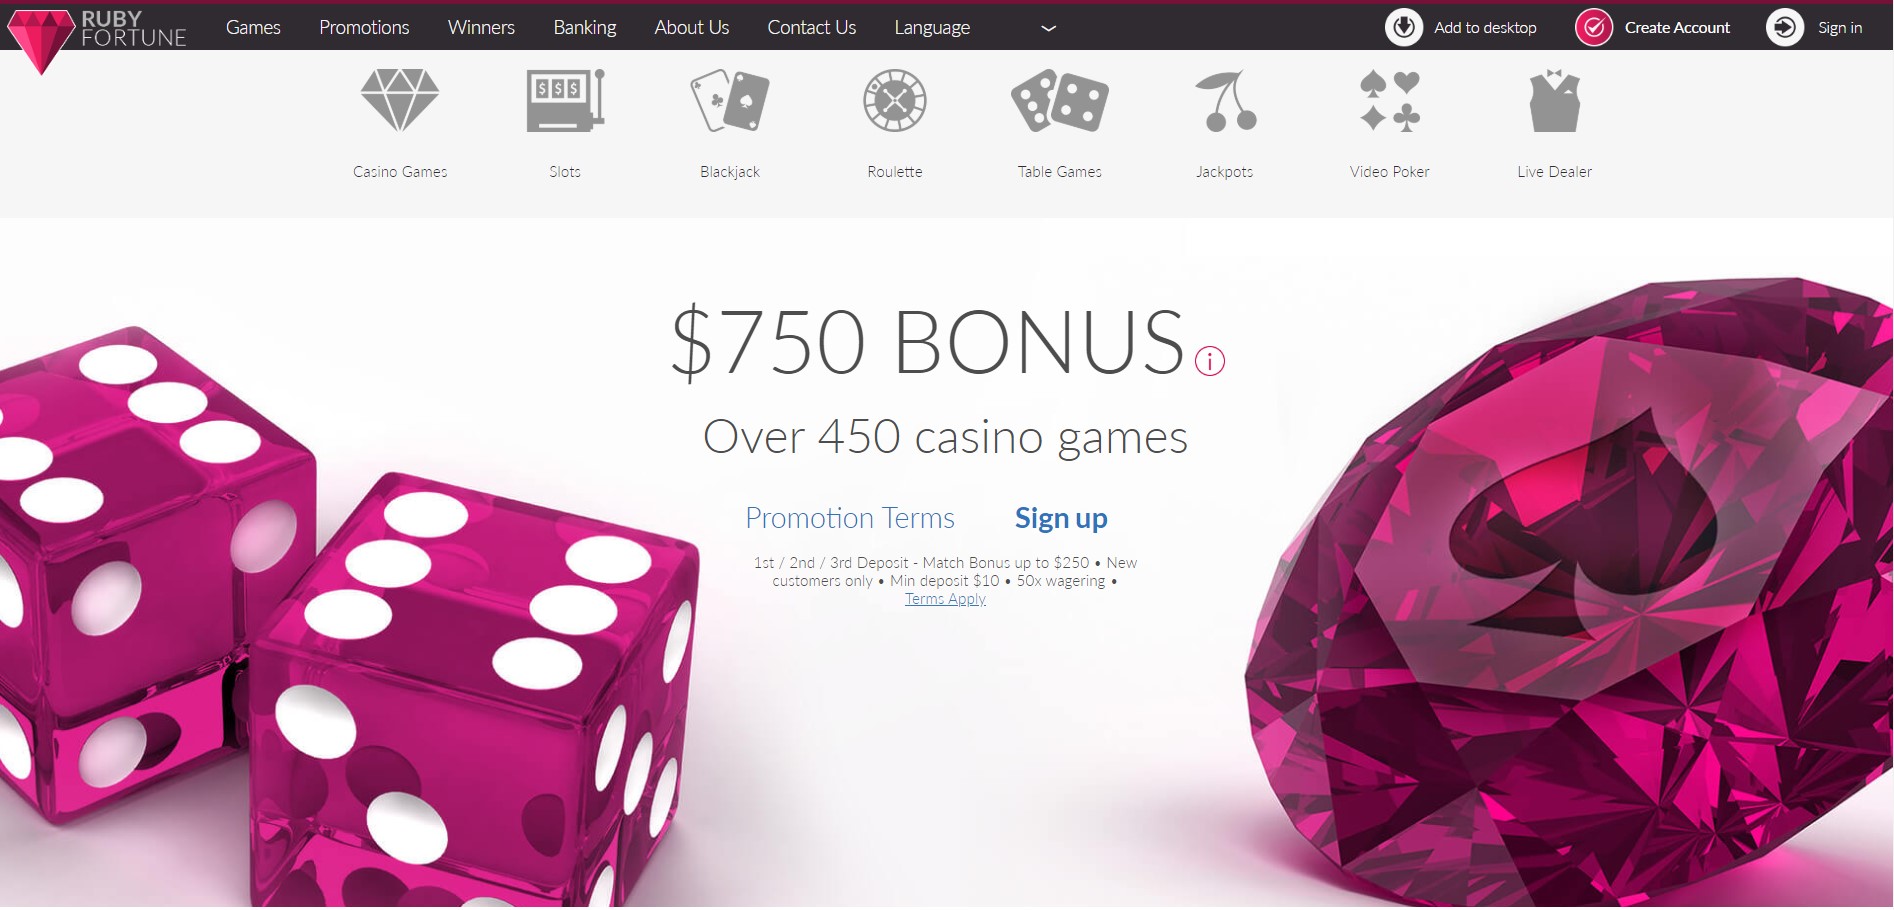 Ruby fortune casino review